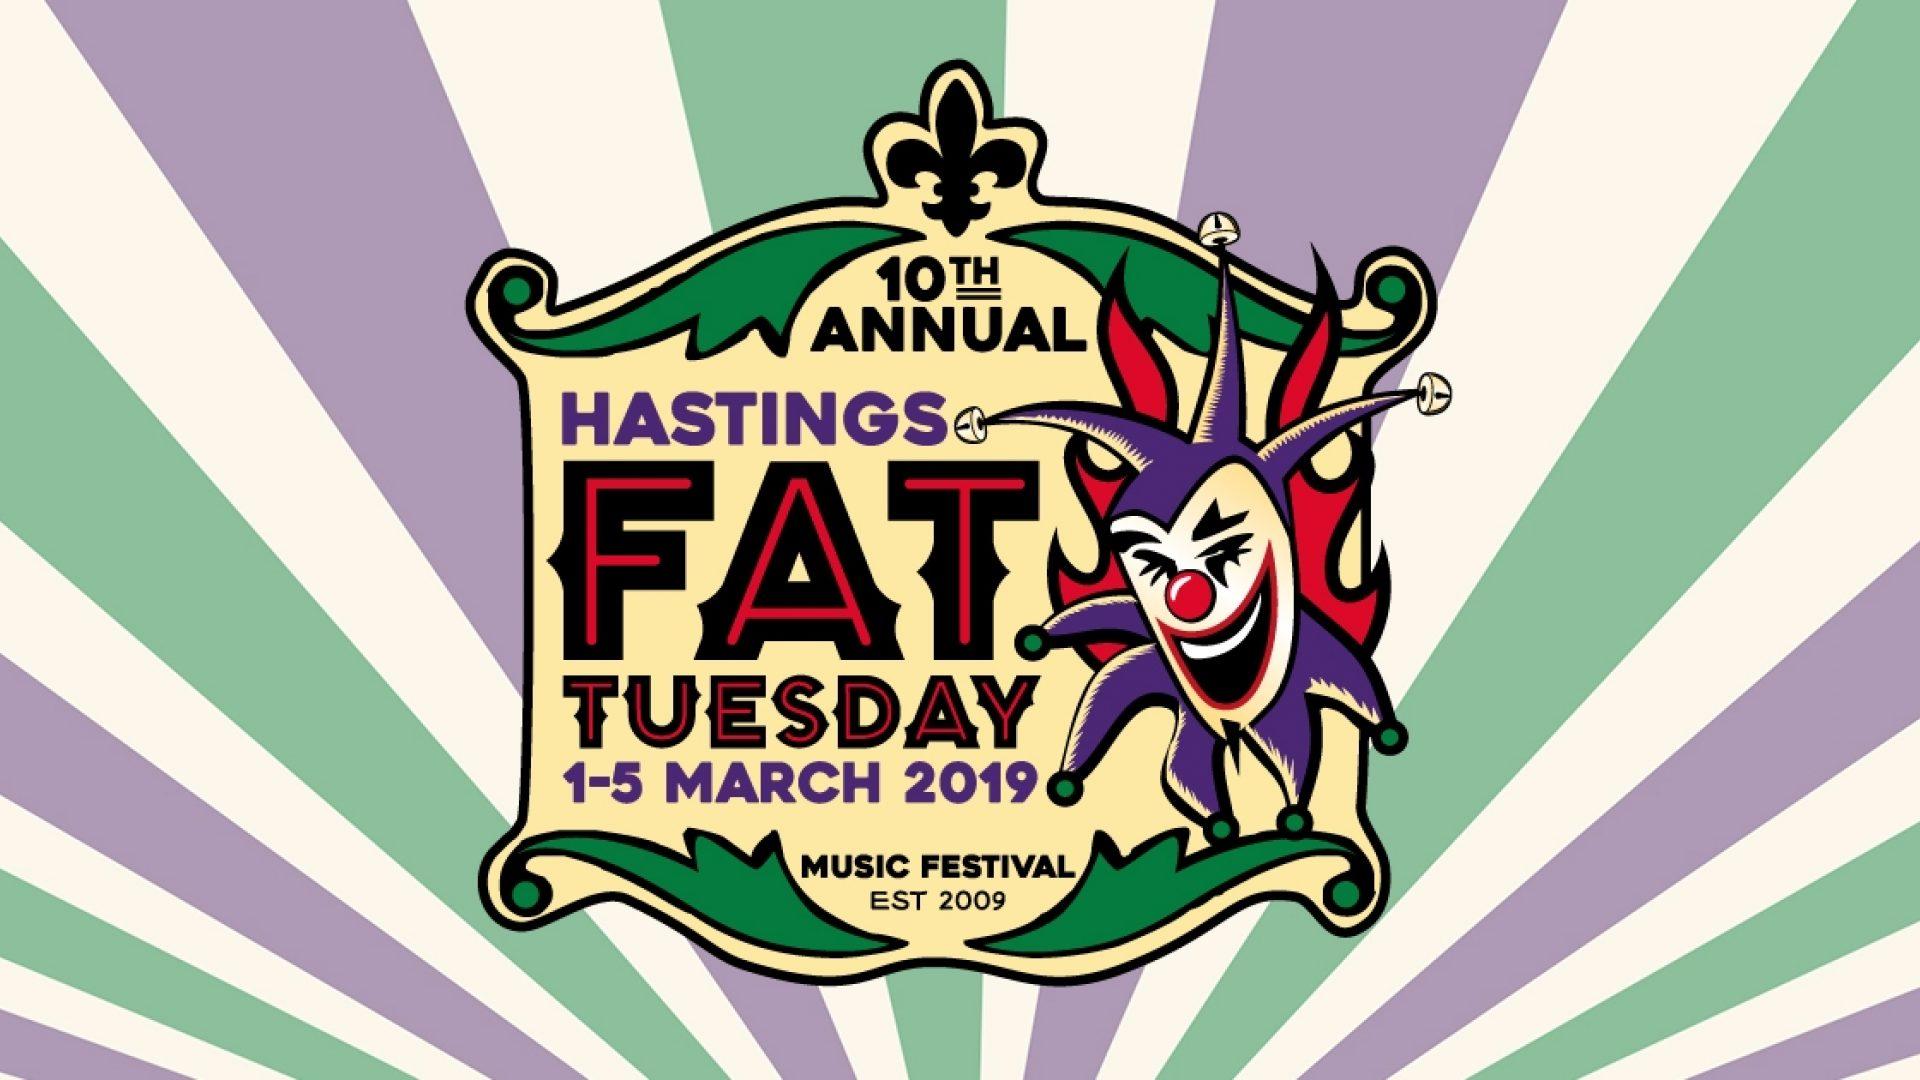 Hastings Fat Tuesday announce a new initiative to reduce